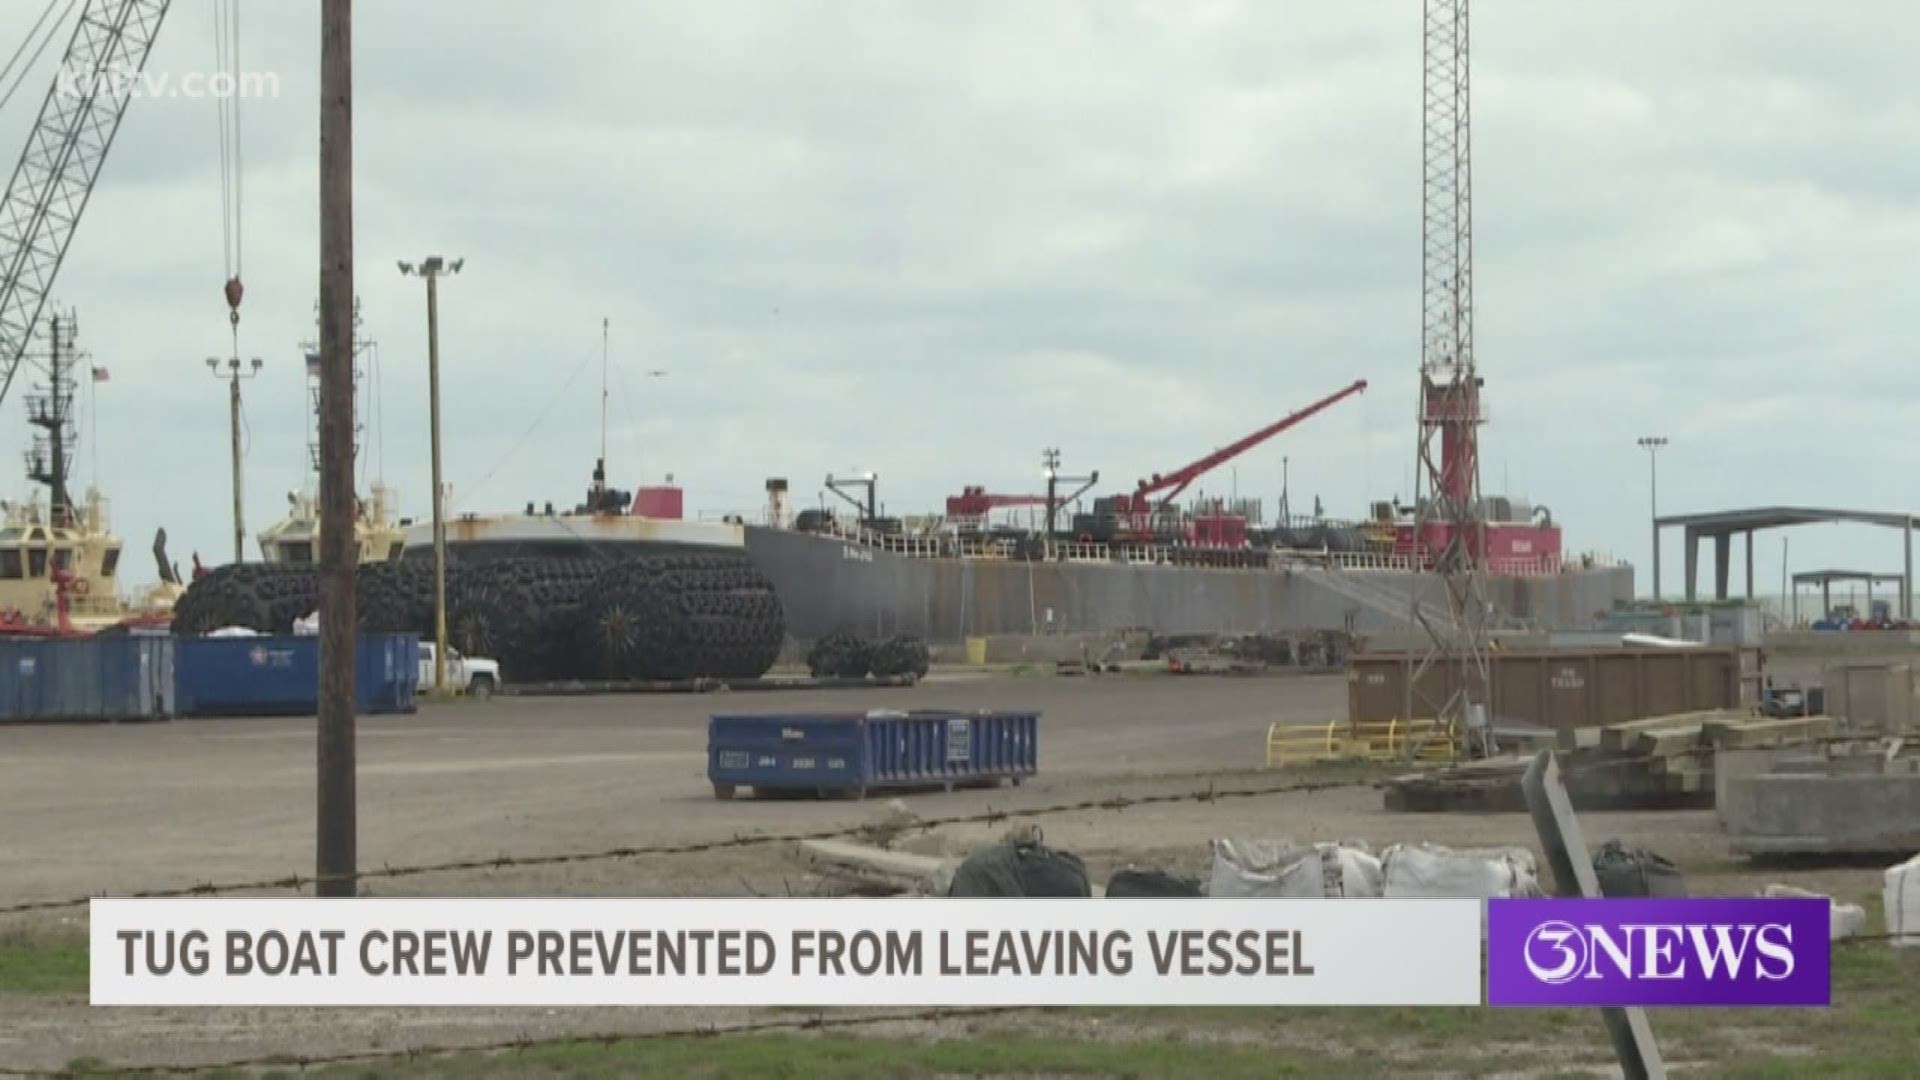 A group of merchant marines has been ordered by the Coast Guard to remain aboard their vessel.